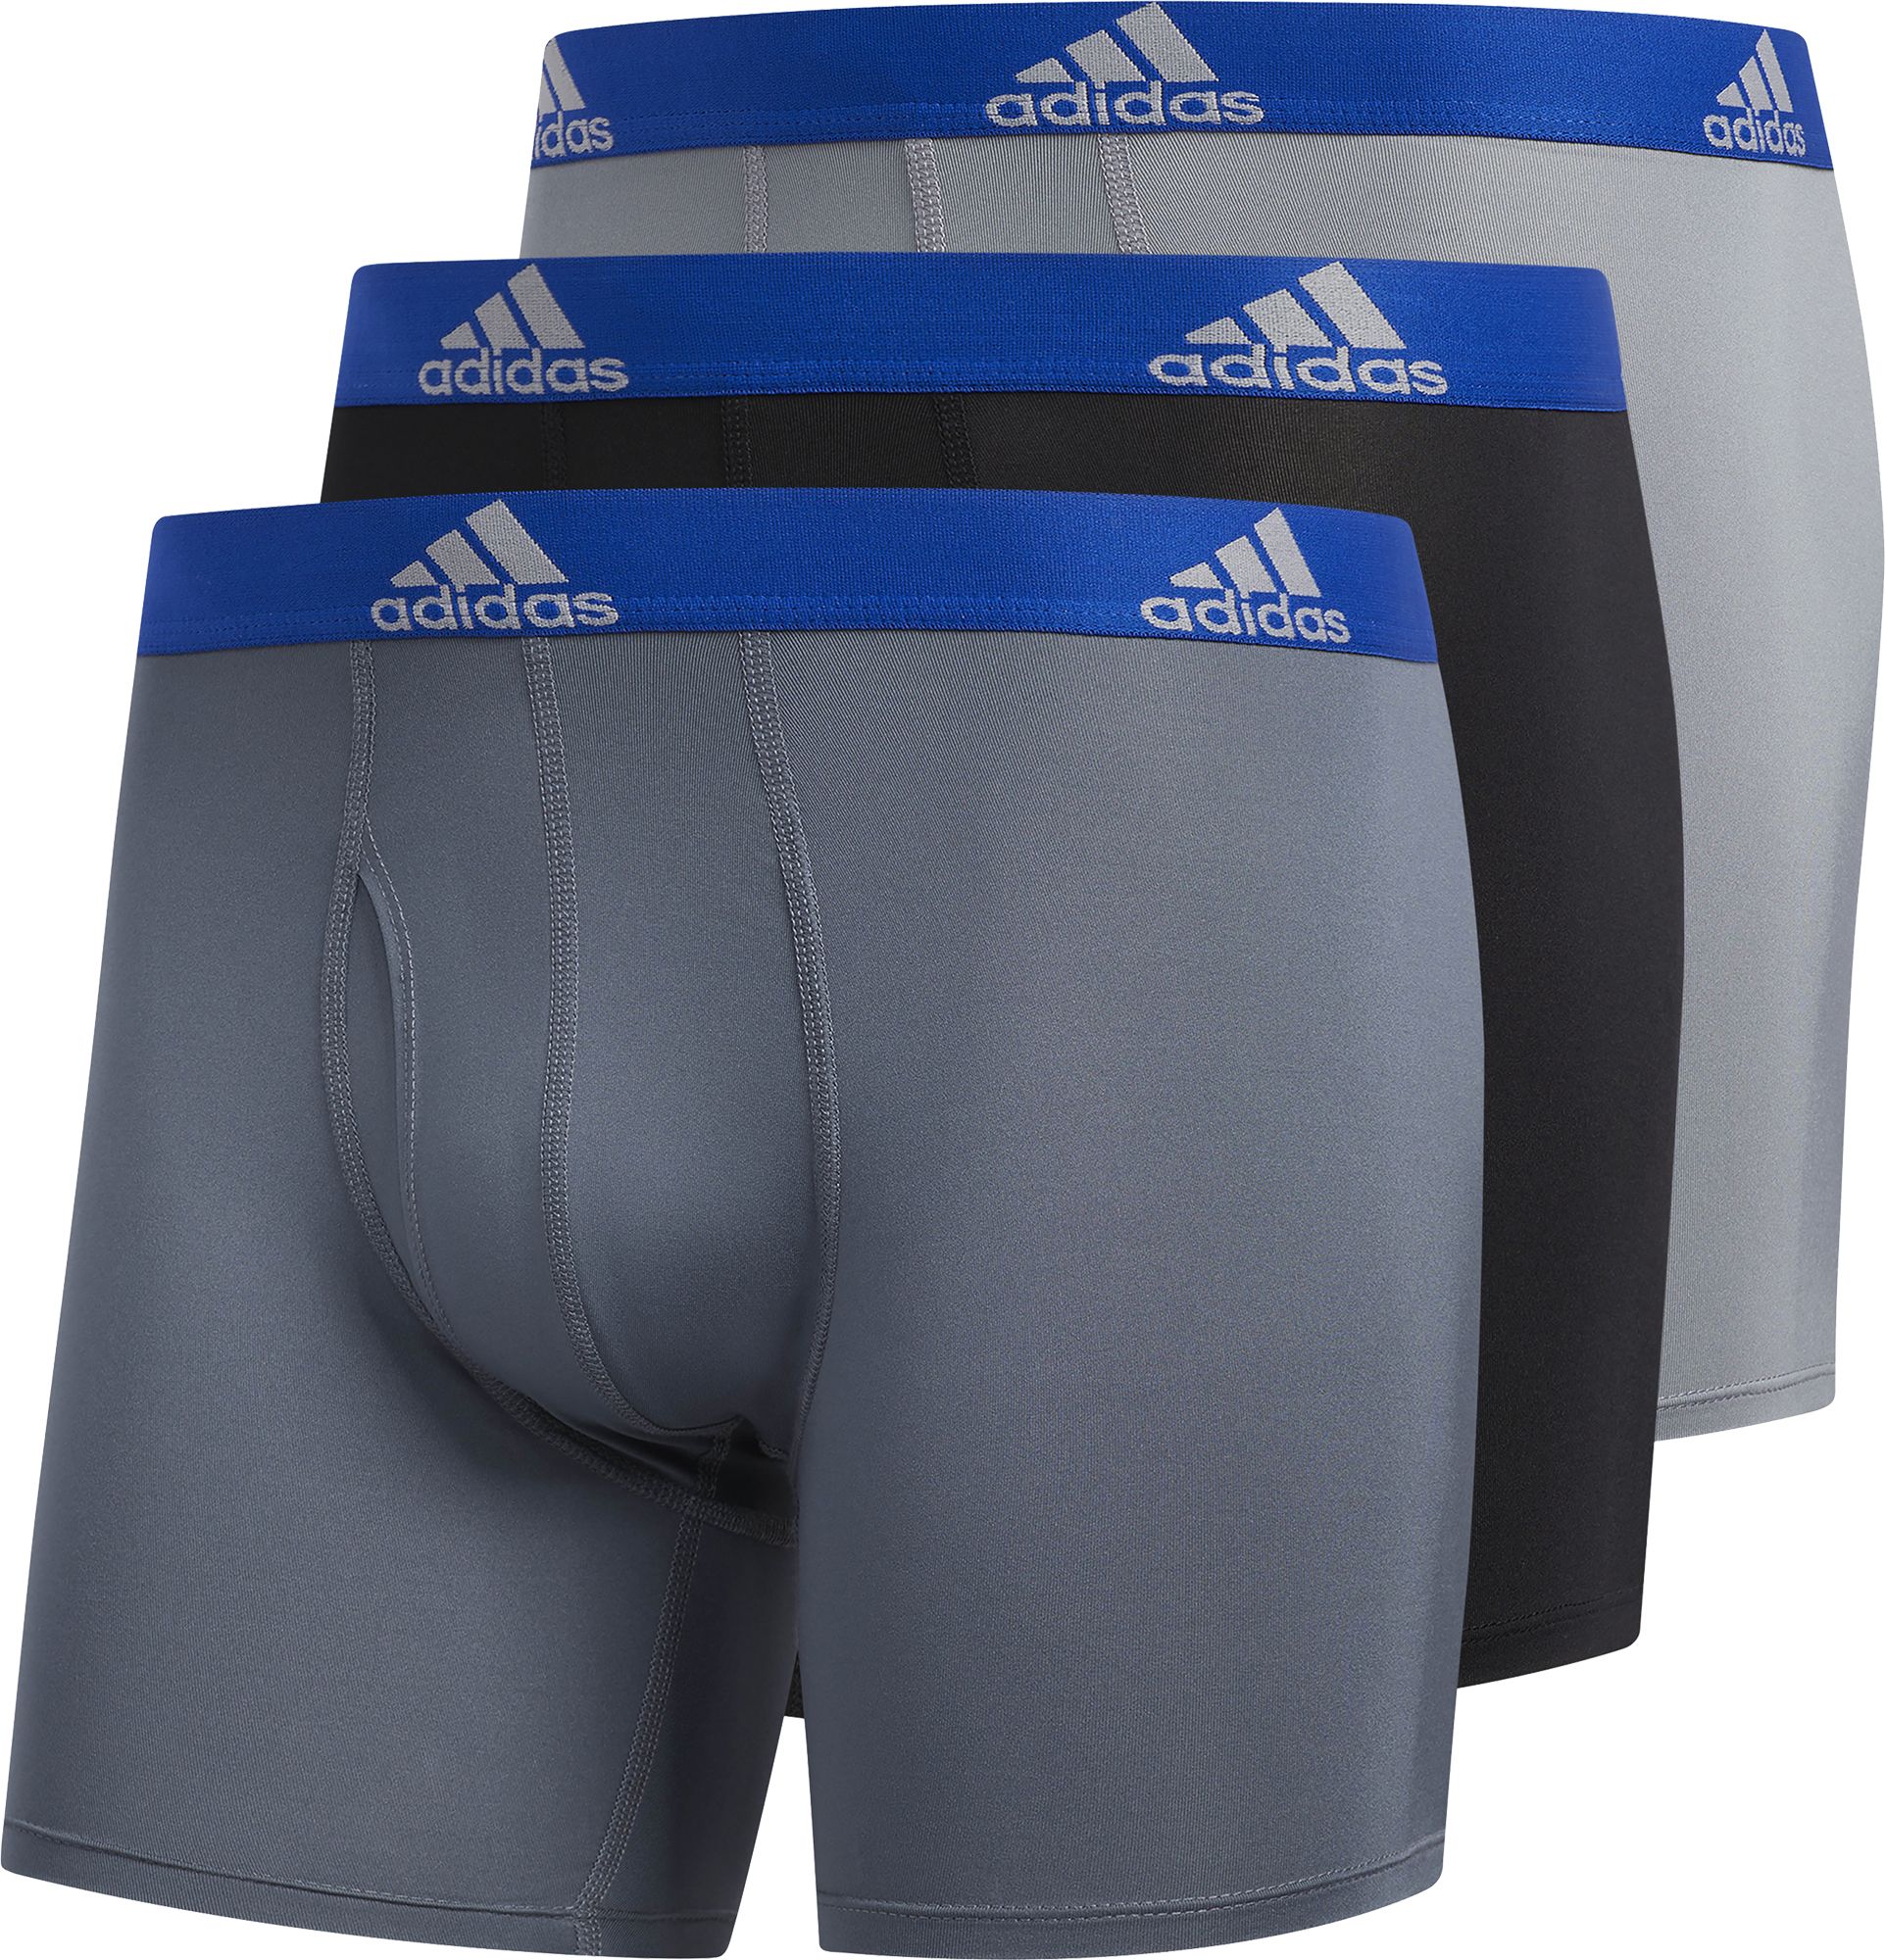 adidas boxer brief size chart